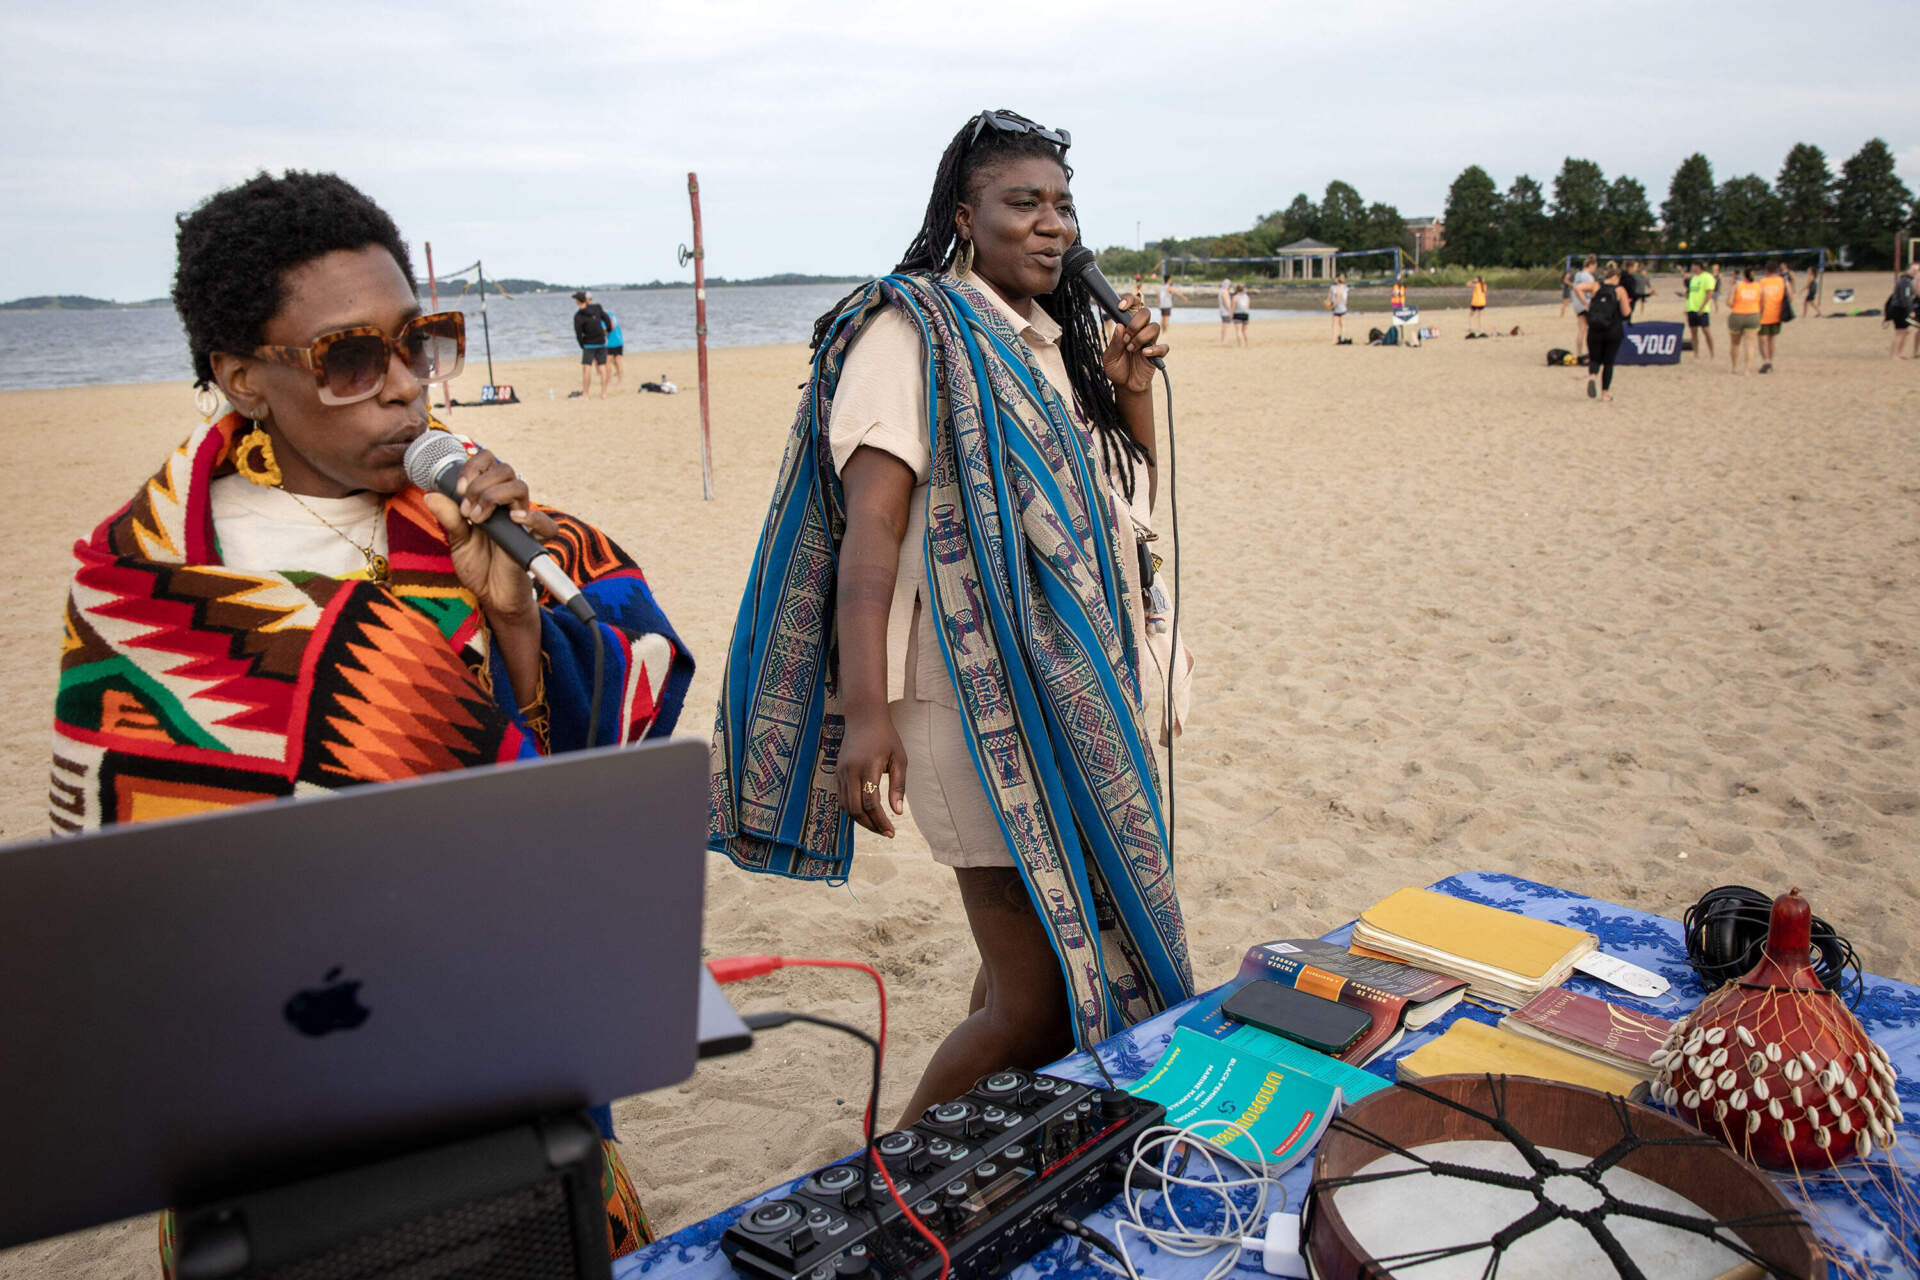 Vocalist Thamanai and performance artist Dzidzor sing together at a rest activation at Carson Beach in Boston. (Robin Lubbock/WBUR)